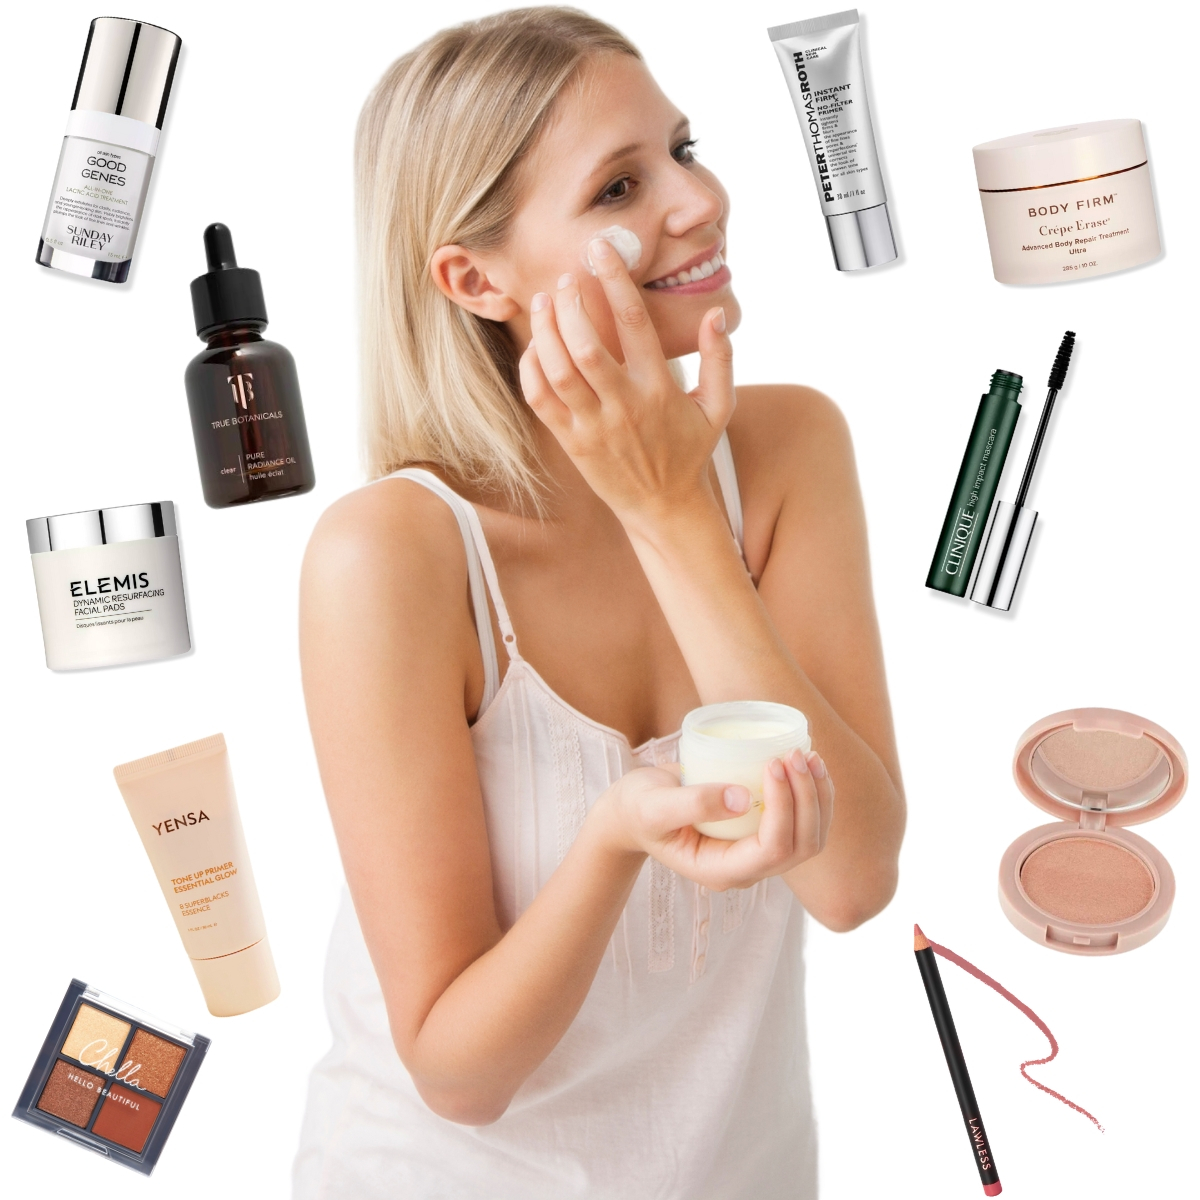 High-quality beauty products